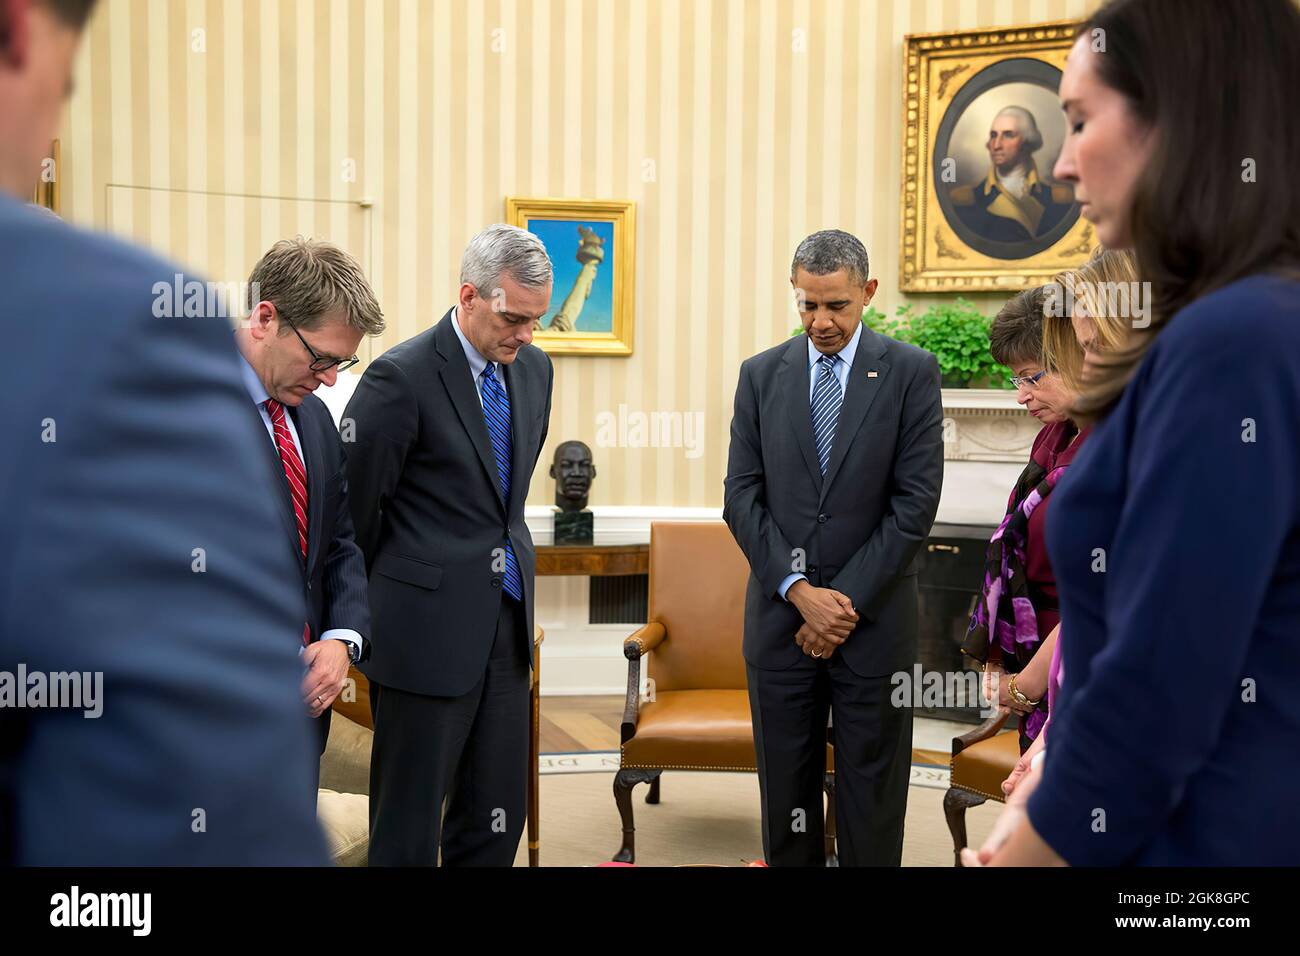 President Barack Obama observes a moment of silence during his meeting with senior advisors in the Oval Office at 2:49 P.M., April 15, 2014, to mark the one-year anniversary of the Boston Marathon bombings. Pictured from left, are Senior Advisor Dan Pfeiffer, Press Secretary Jay Carney, Chief of Staff Denis McDonough, Senior Advisor Valerie Jarrett, Communications Director Jennifer Palmieri, and Katie Beirne Fallon, Director of Legislative Affairs. (Official White House Photo by Pete Souza)  President Barack Obama observes a moment of silence during his meeting with senior advisors in the Oval Stock Photo